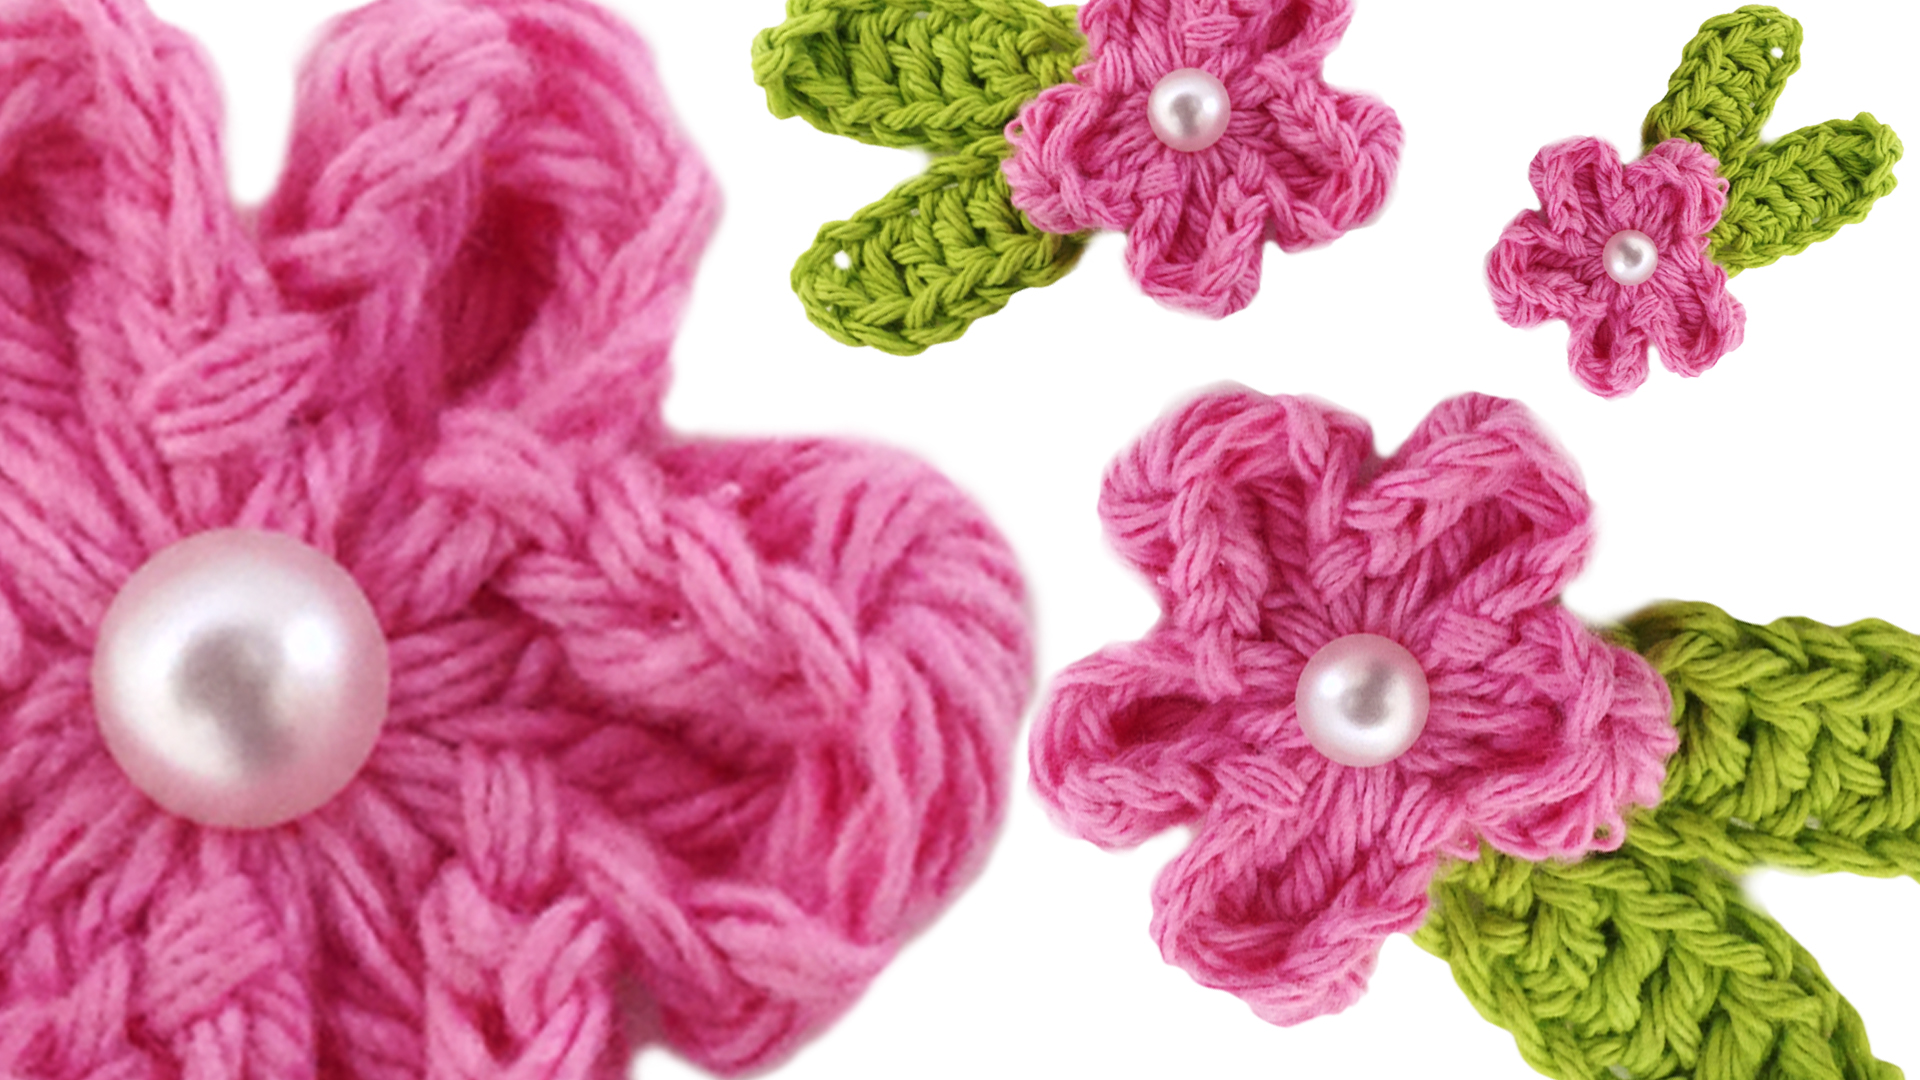 maggies-crochet-easy-pearl-rose-free-pattern-close-up